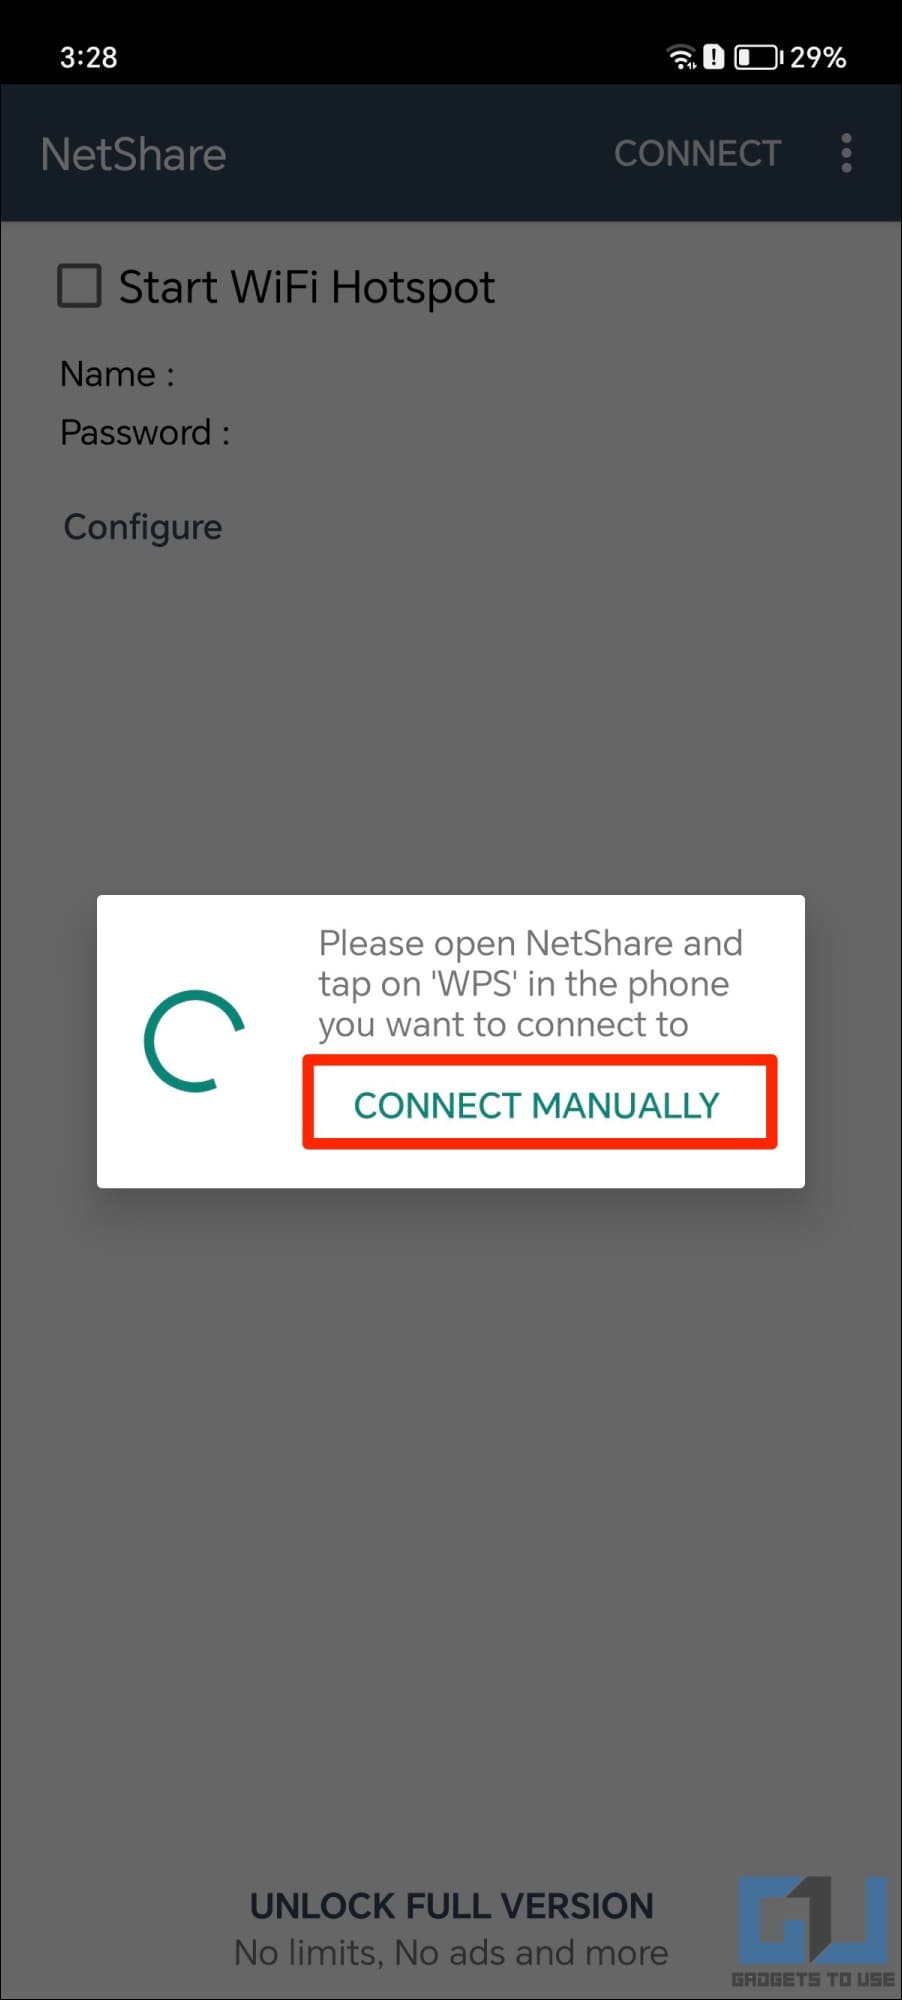 Tap Connect Manually